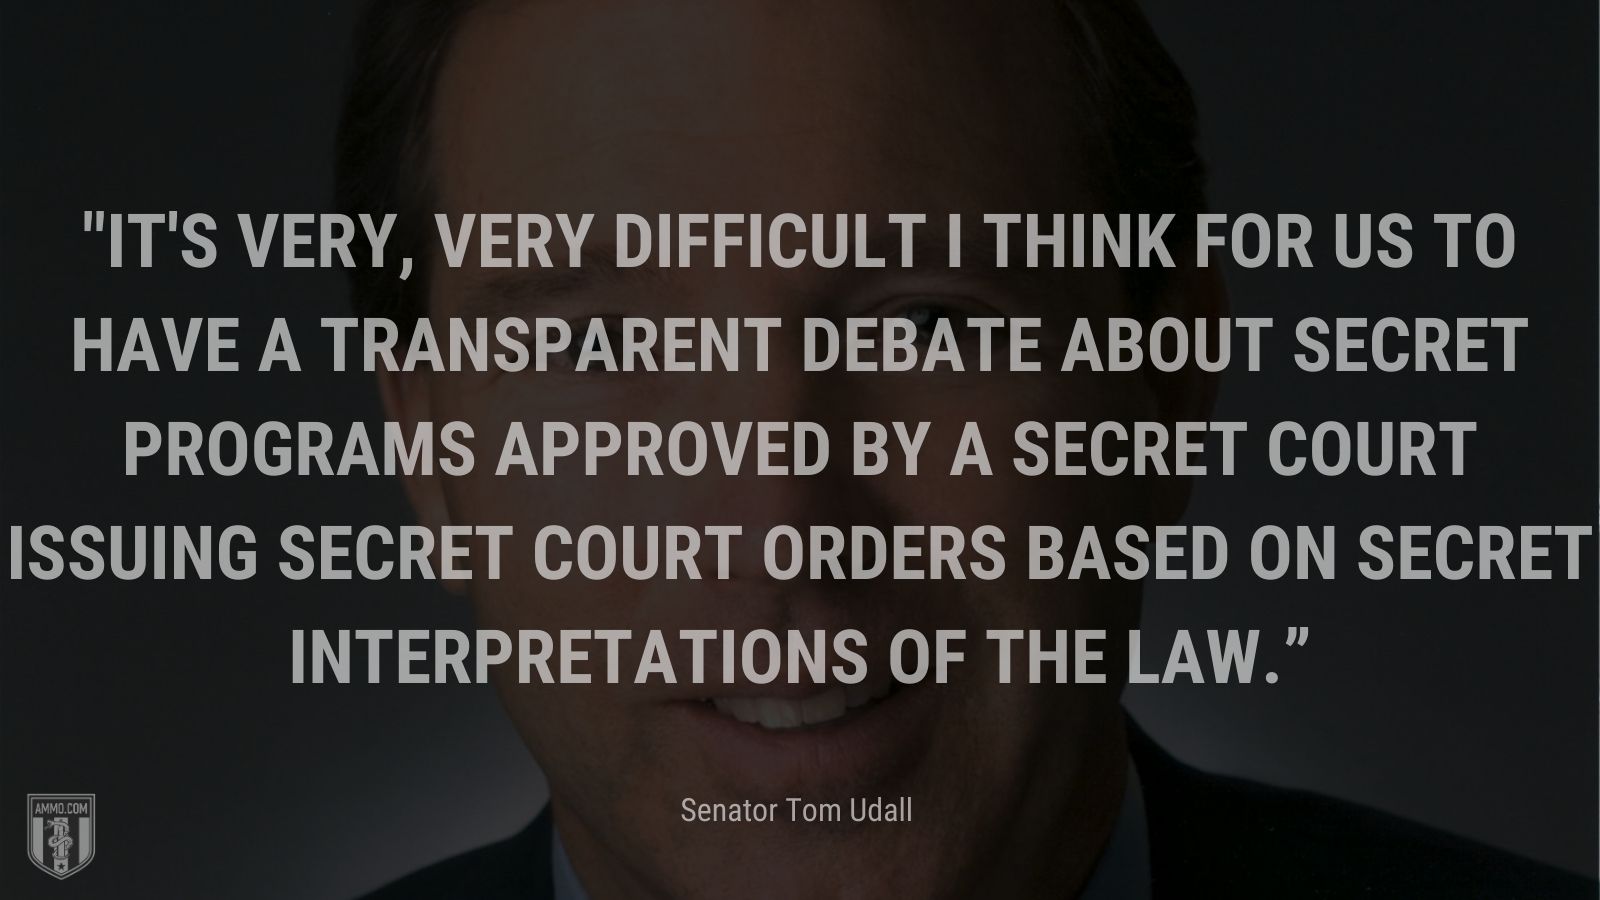 “It's very, very difficult I think for us to have a transparent debate about secret programs approved by a secret court issuing secret court orders based on secret interpretations of the law.” - Senator Tom Udall